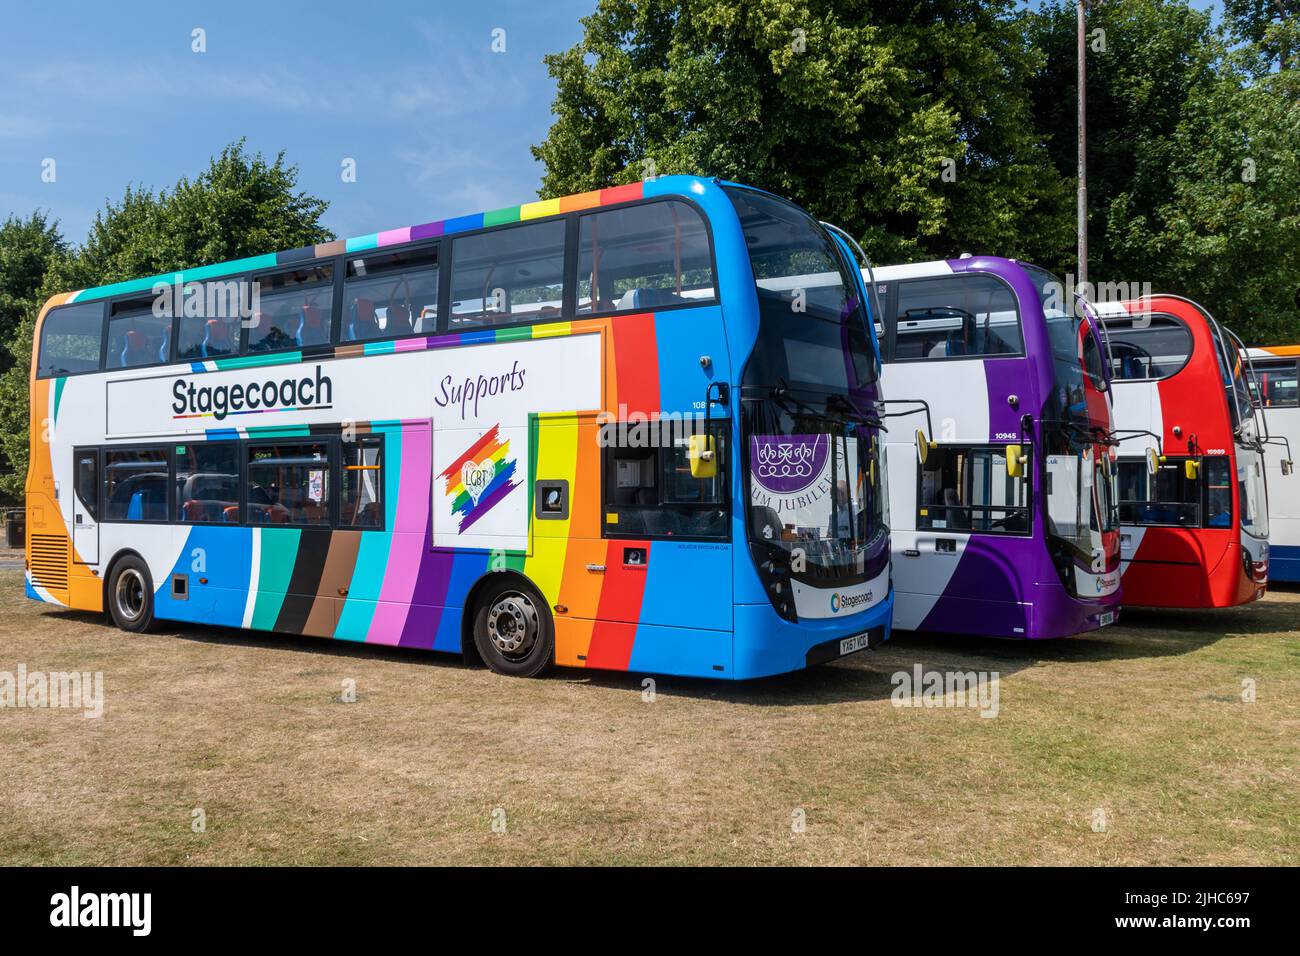 LBGT Pride Stagecoach bus at Alton Bus Rally and Running Day in July 2022, summer transport event in Anstey Park, Alton, Hampshire, England, UK Stock Photo